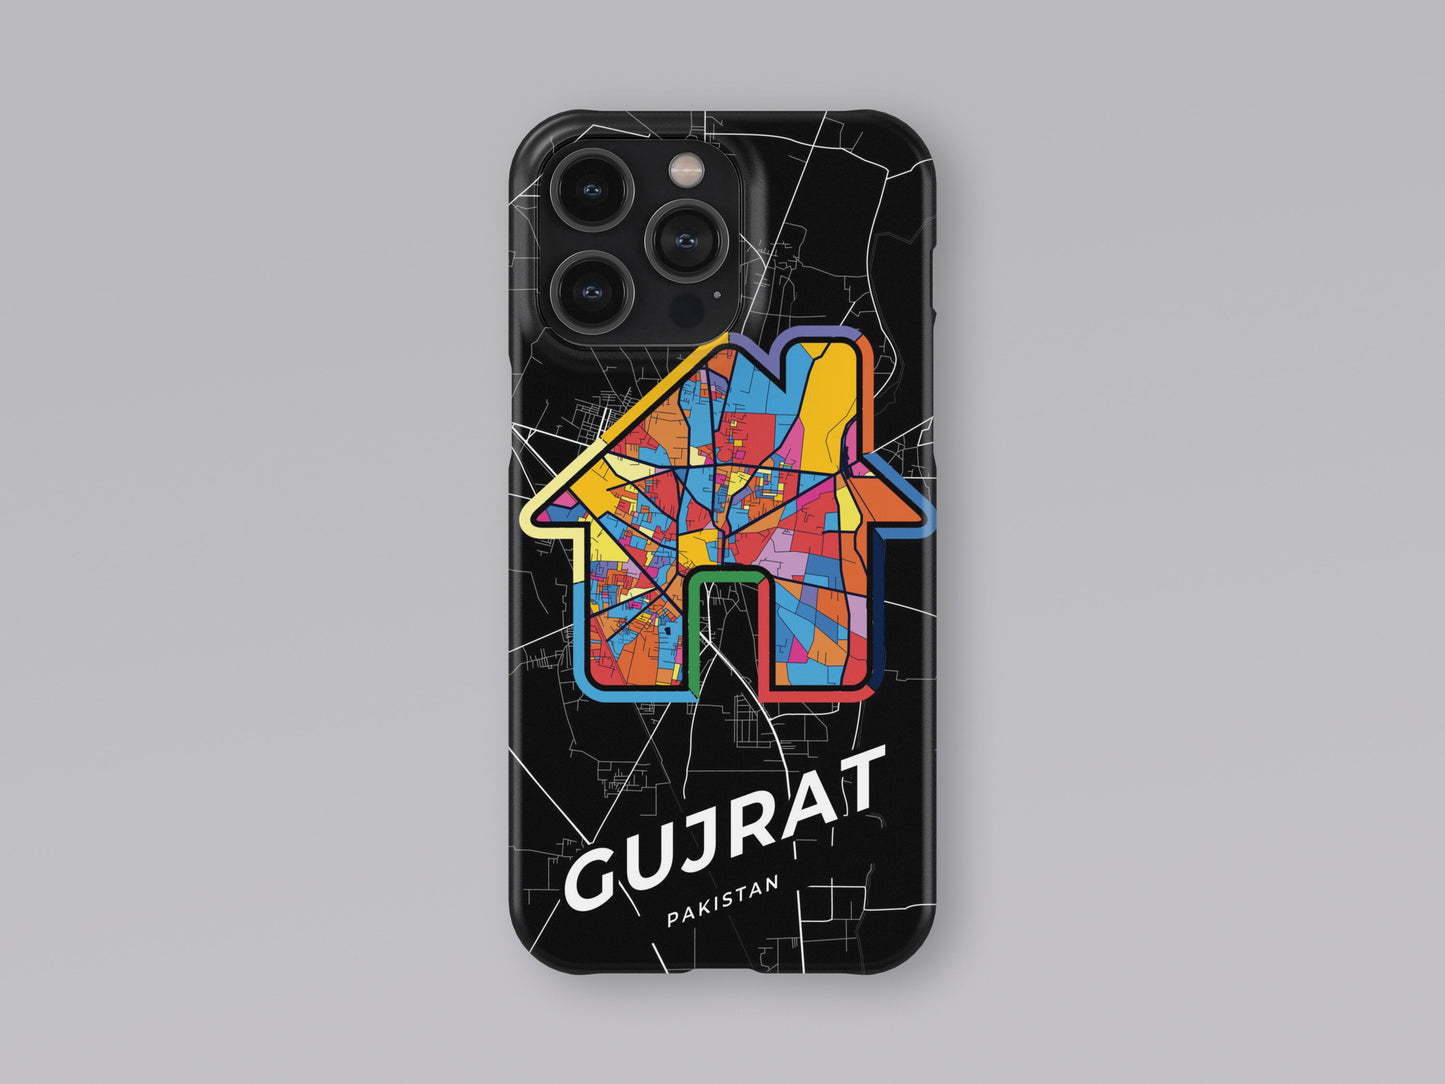 Gujrat Pakistan slim phone case with colorful icon. Birthday, wedding or housewarming gift. Couple match cases. 3